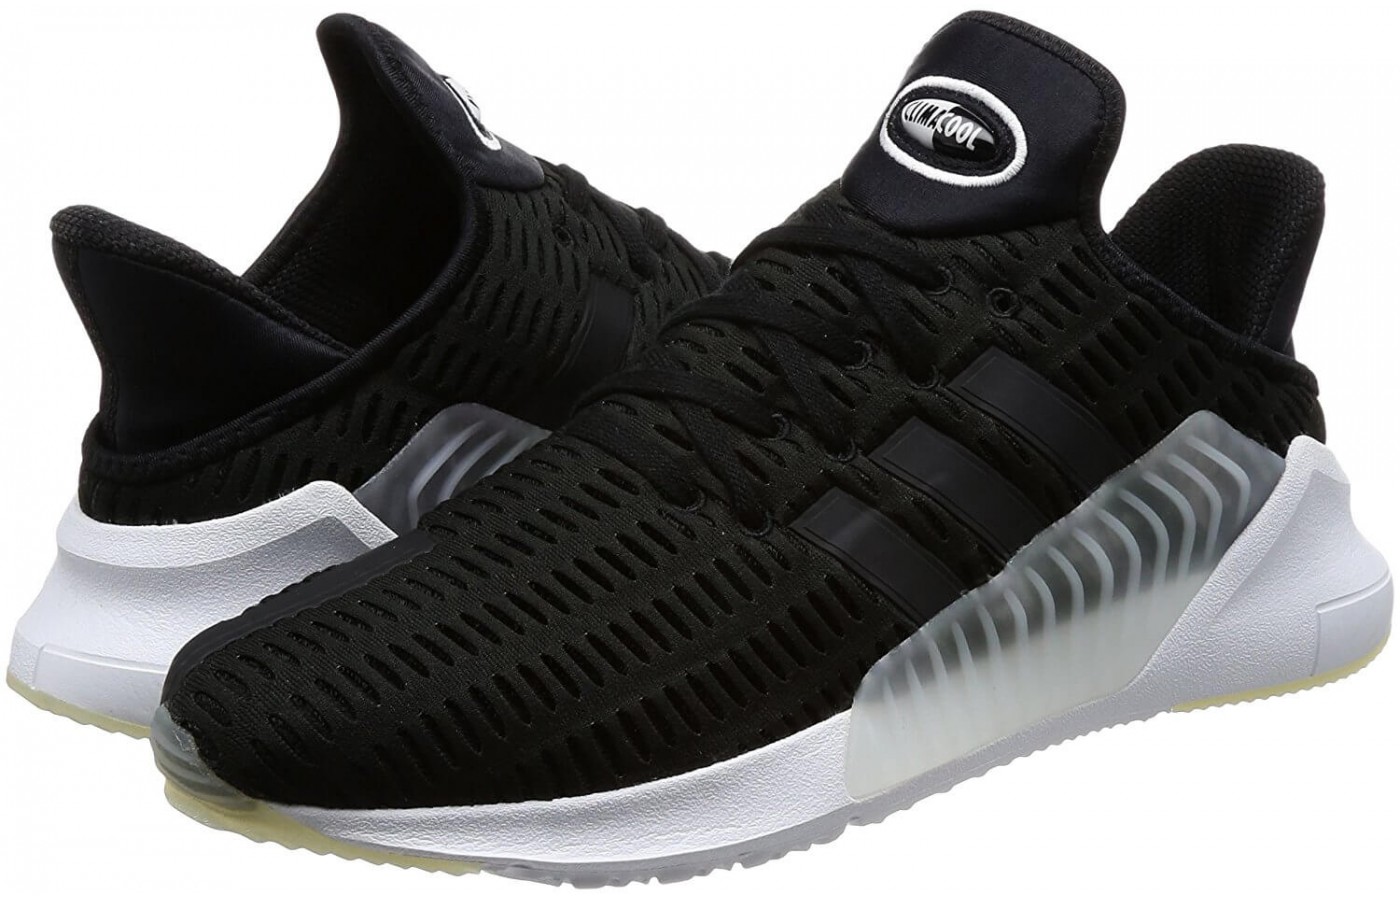 Adidas ClimaCool 02.17 knit upper provides adequate protection.